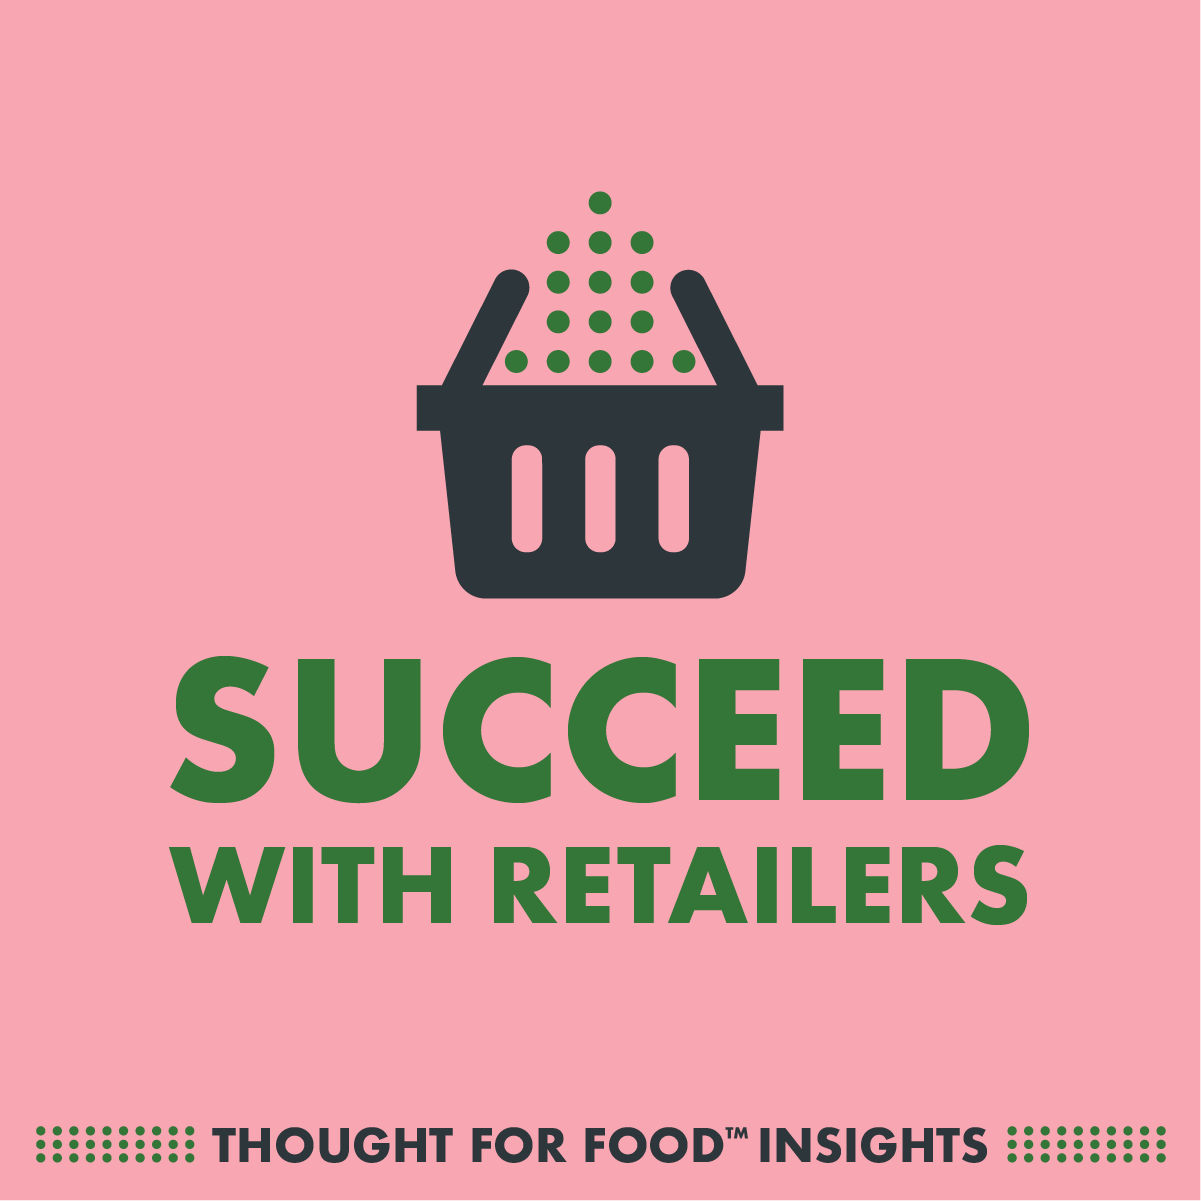 Illustration of a grocery basket filled with JTM dots, representing groceries, that reads Succeed with Retailers